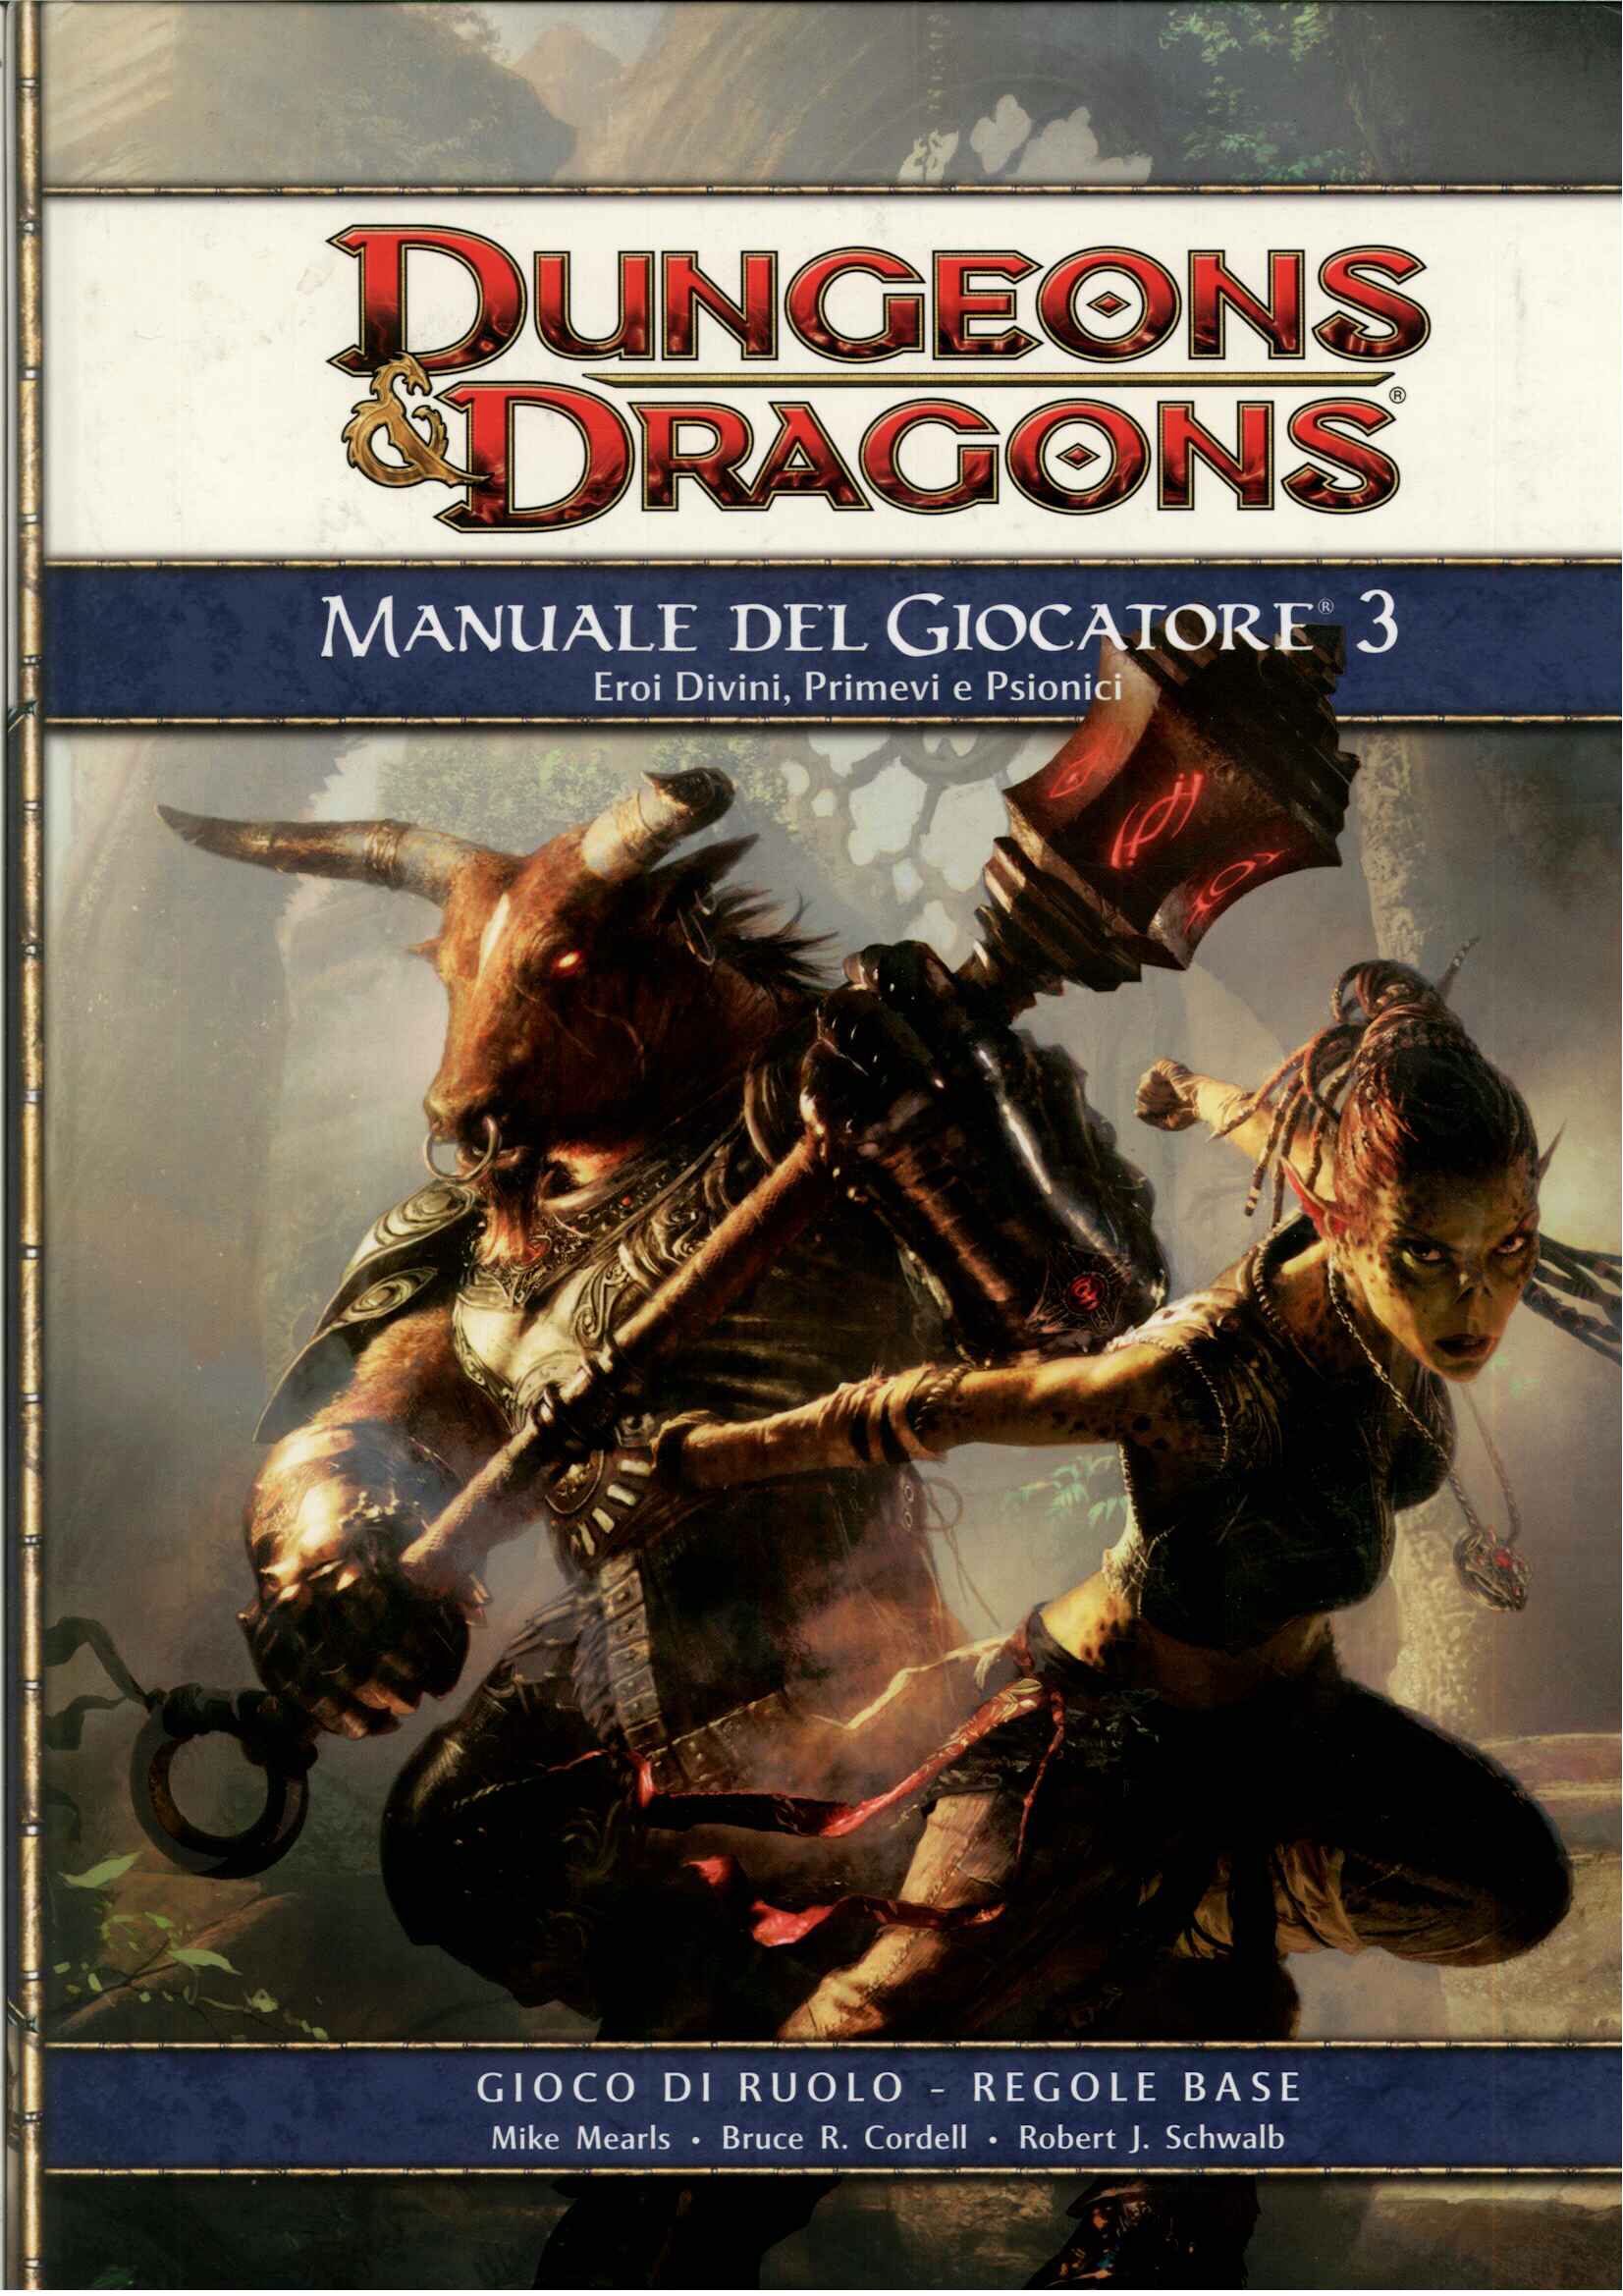 DUNGEONS & DRAGONS. manuale del giocatore 3